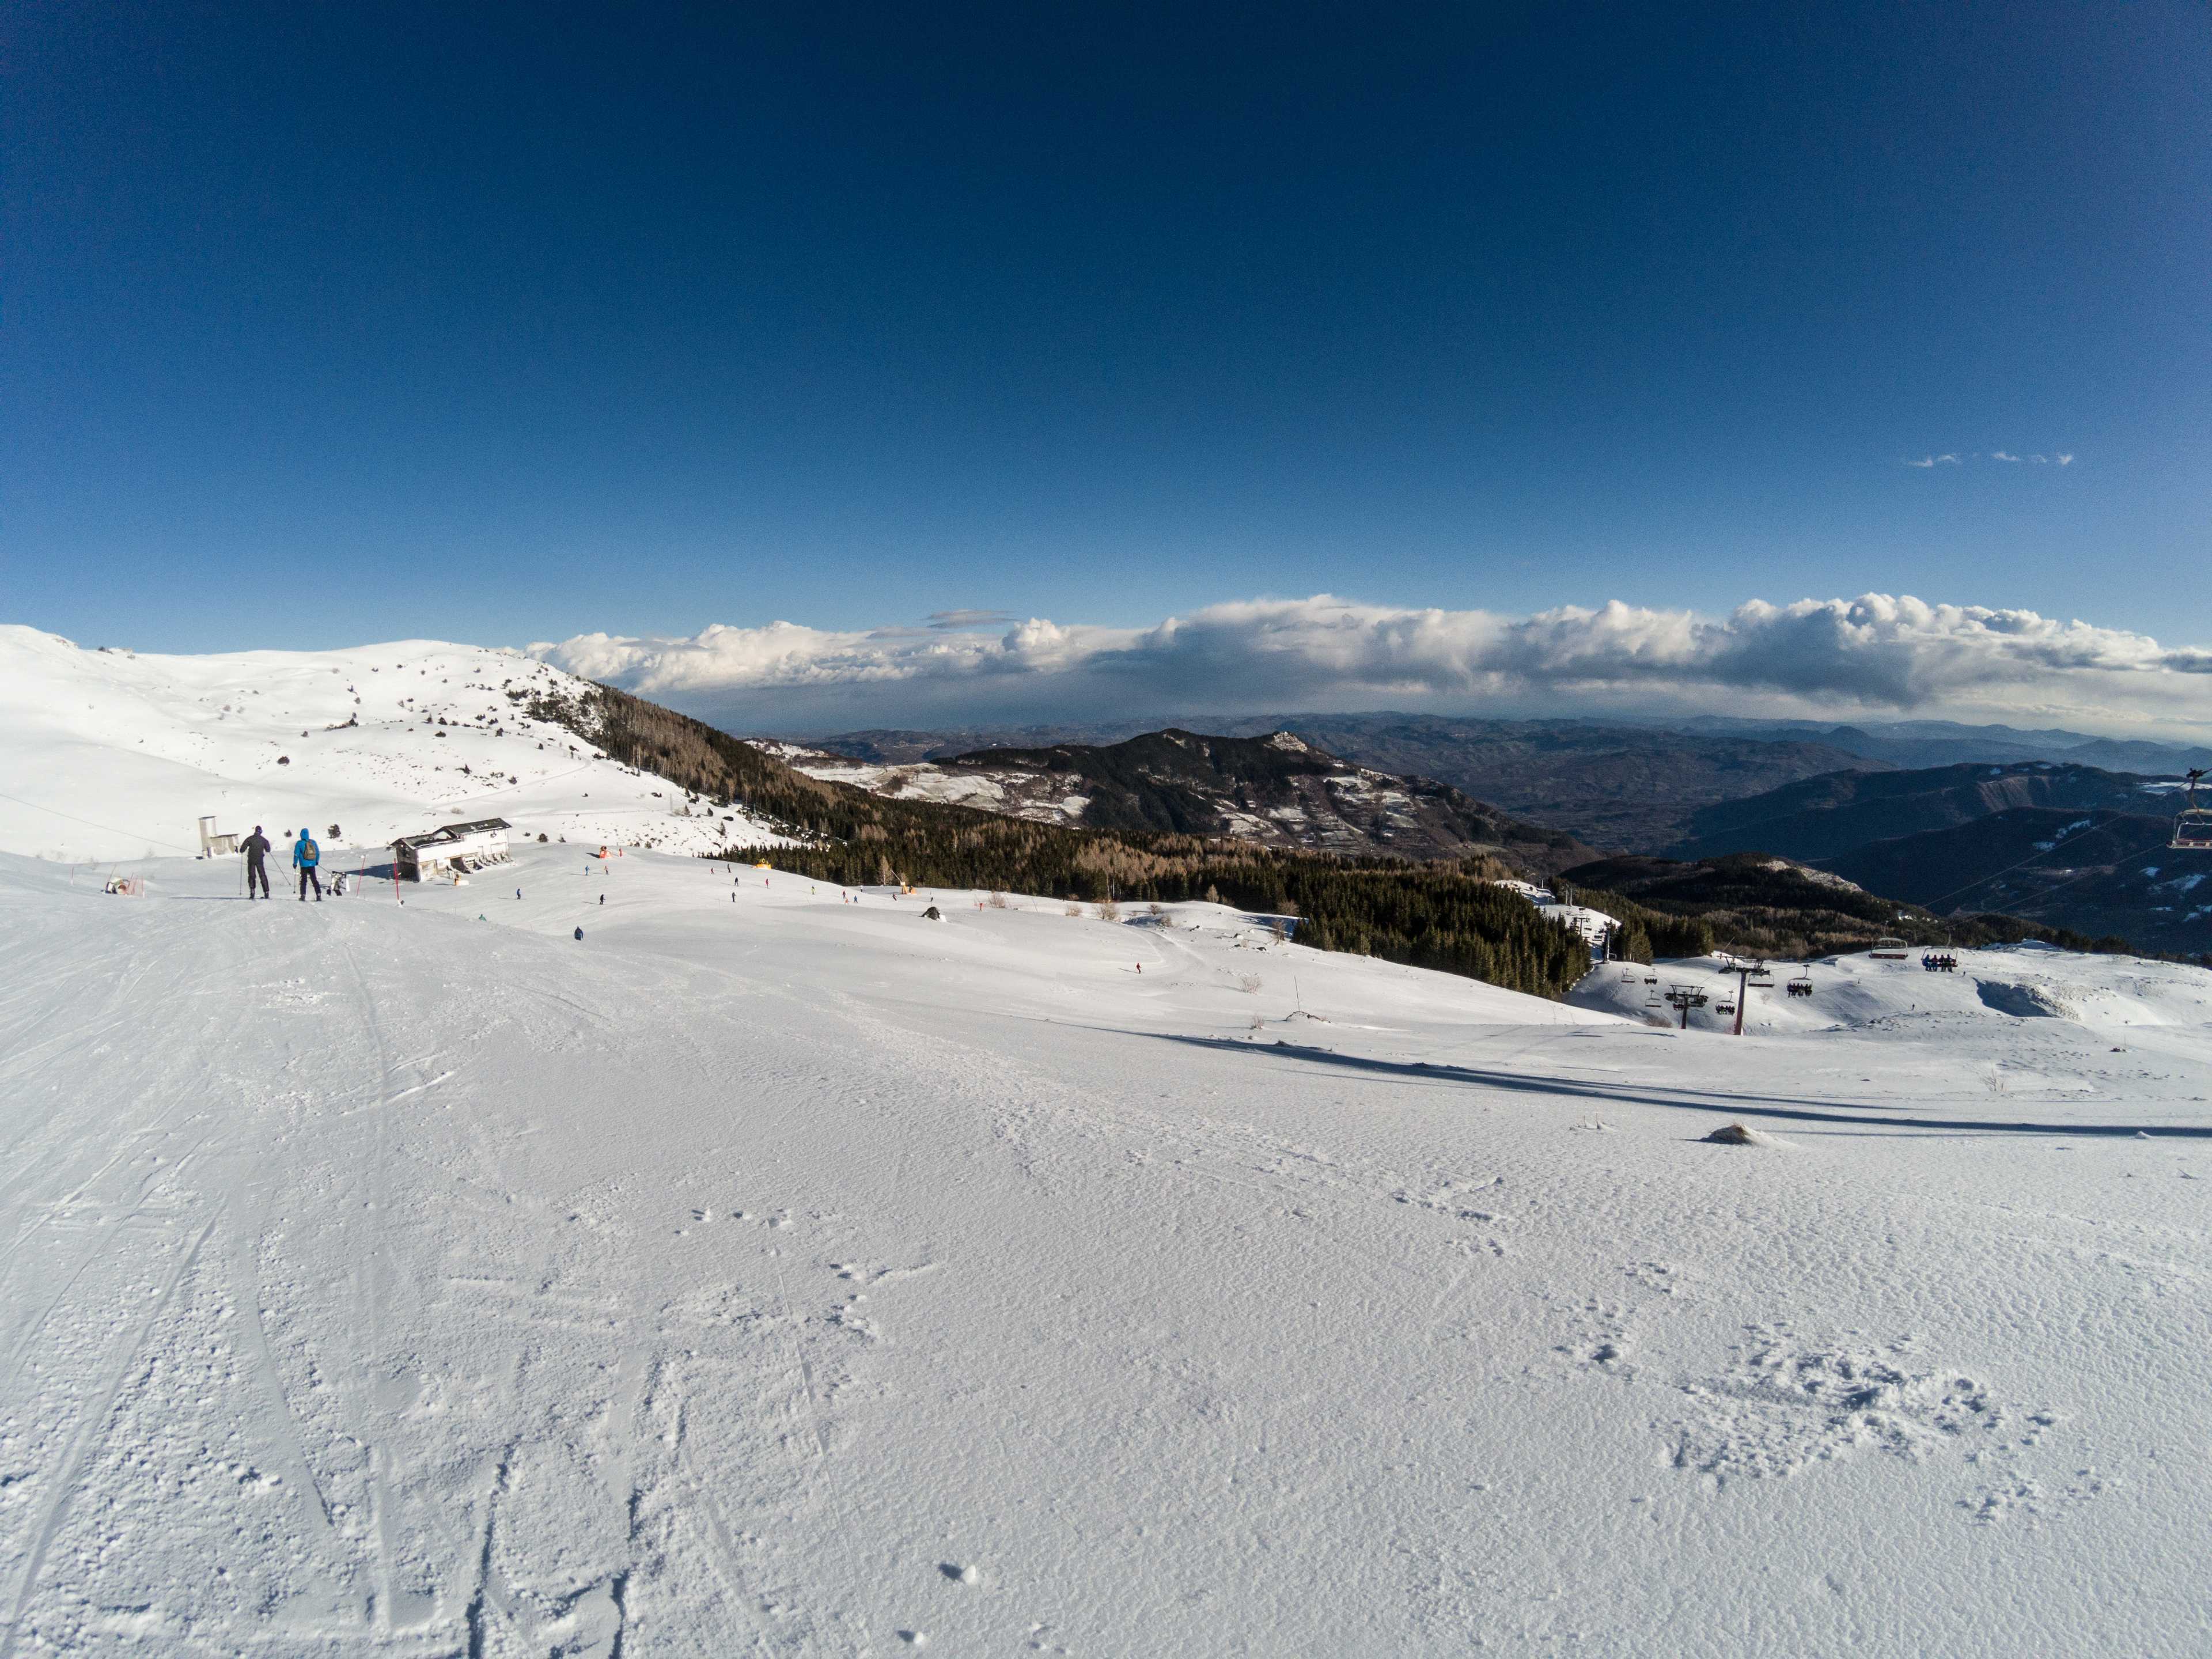 The view from Cimoncino towards the central part of the ski area, Monte Cimone